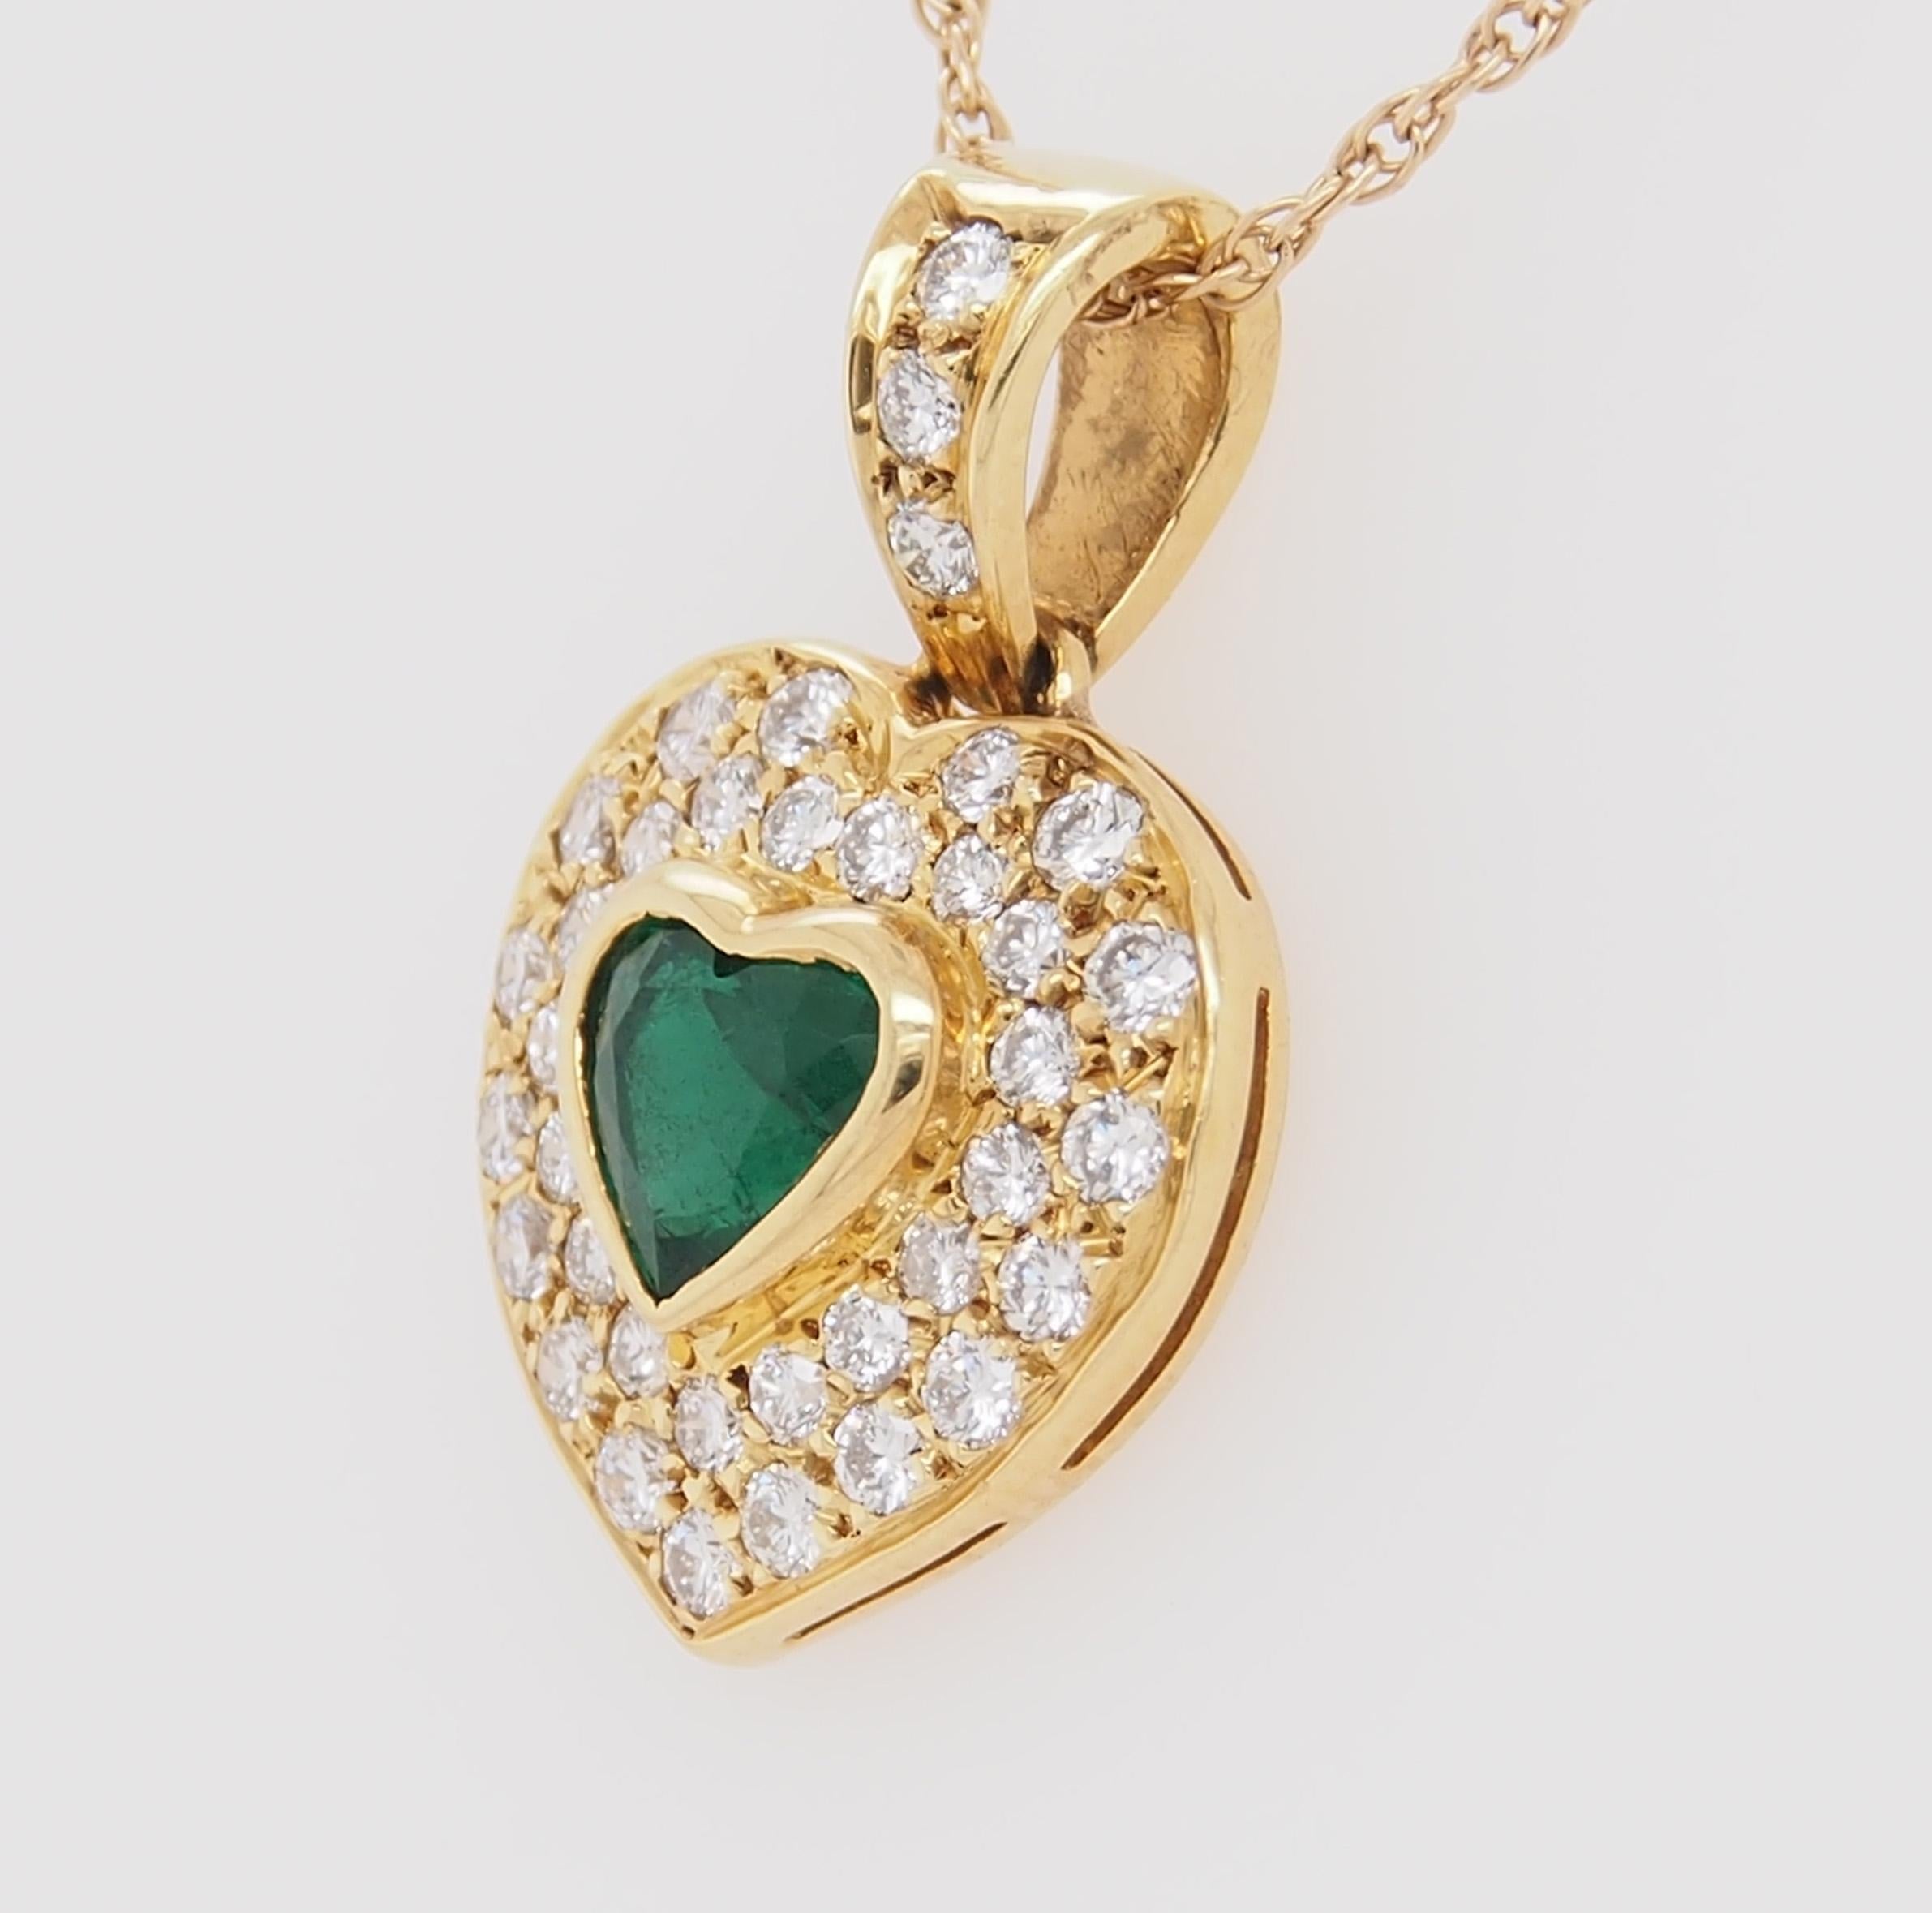 An 18K yellow gold heart shaped pendant. A heart shaped Emerald center approximately 1.05 ct is surrounded by (37) Round Brilliant Cut diamonds G-H in color, VS in clarity and 1.11 carat total weight. The pendant is 1 inch in height, approximately